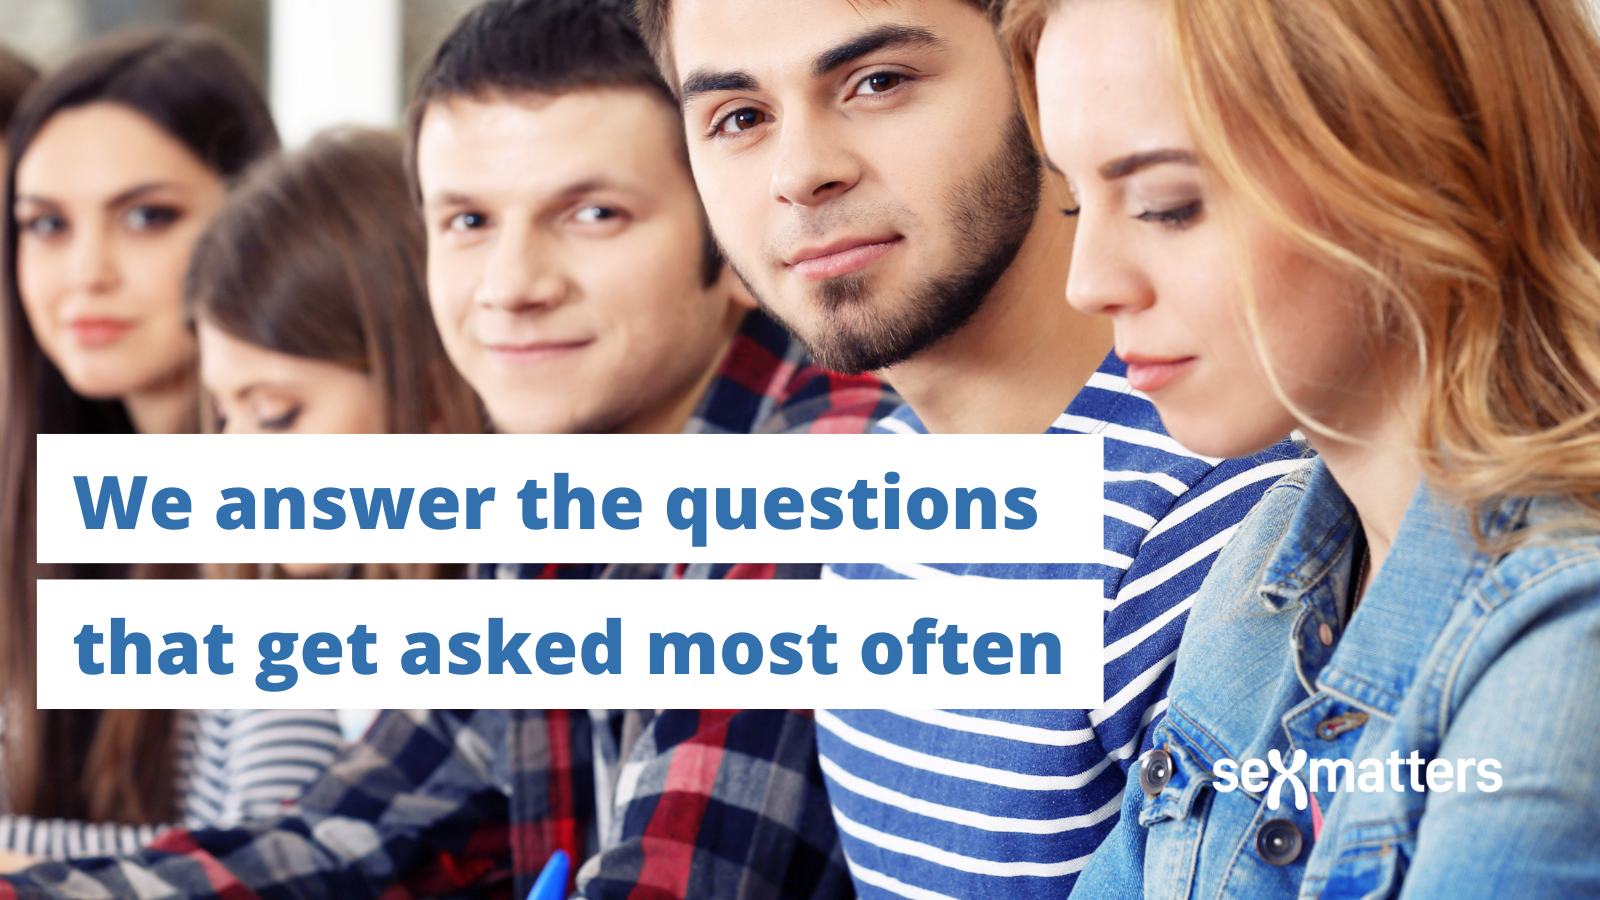 We answer the questions that get asked most often